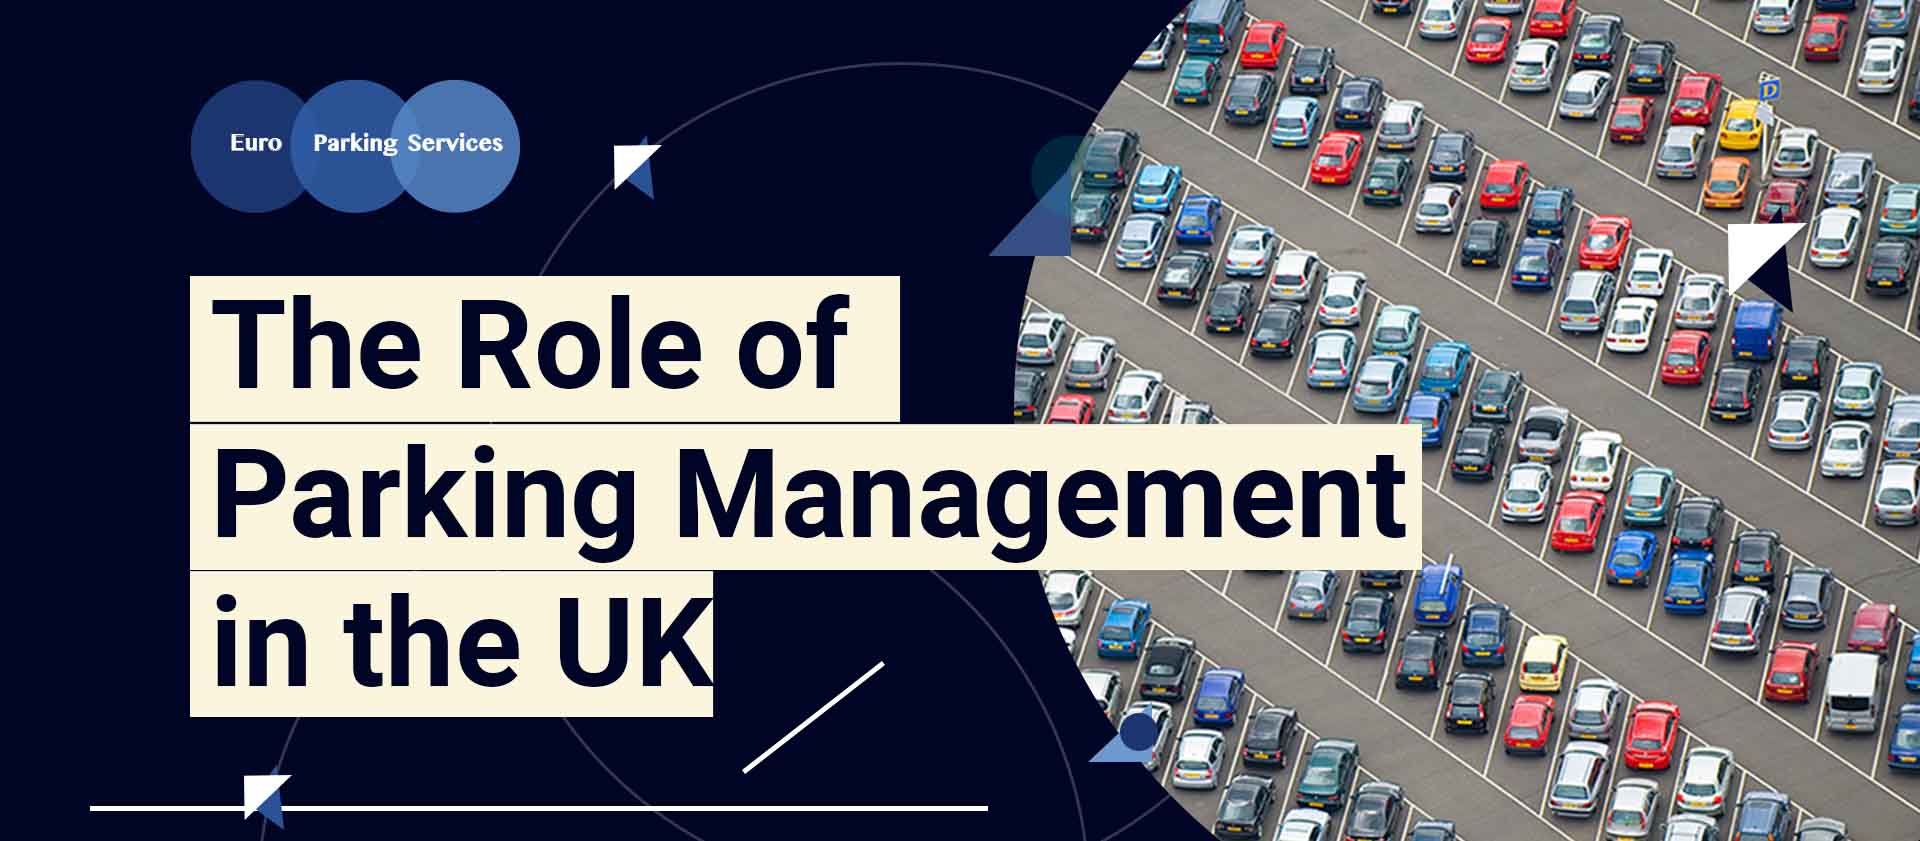 Parking Management in the UK<br />
